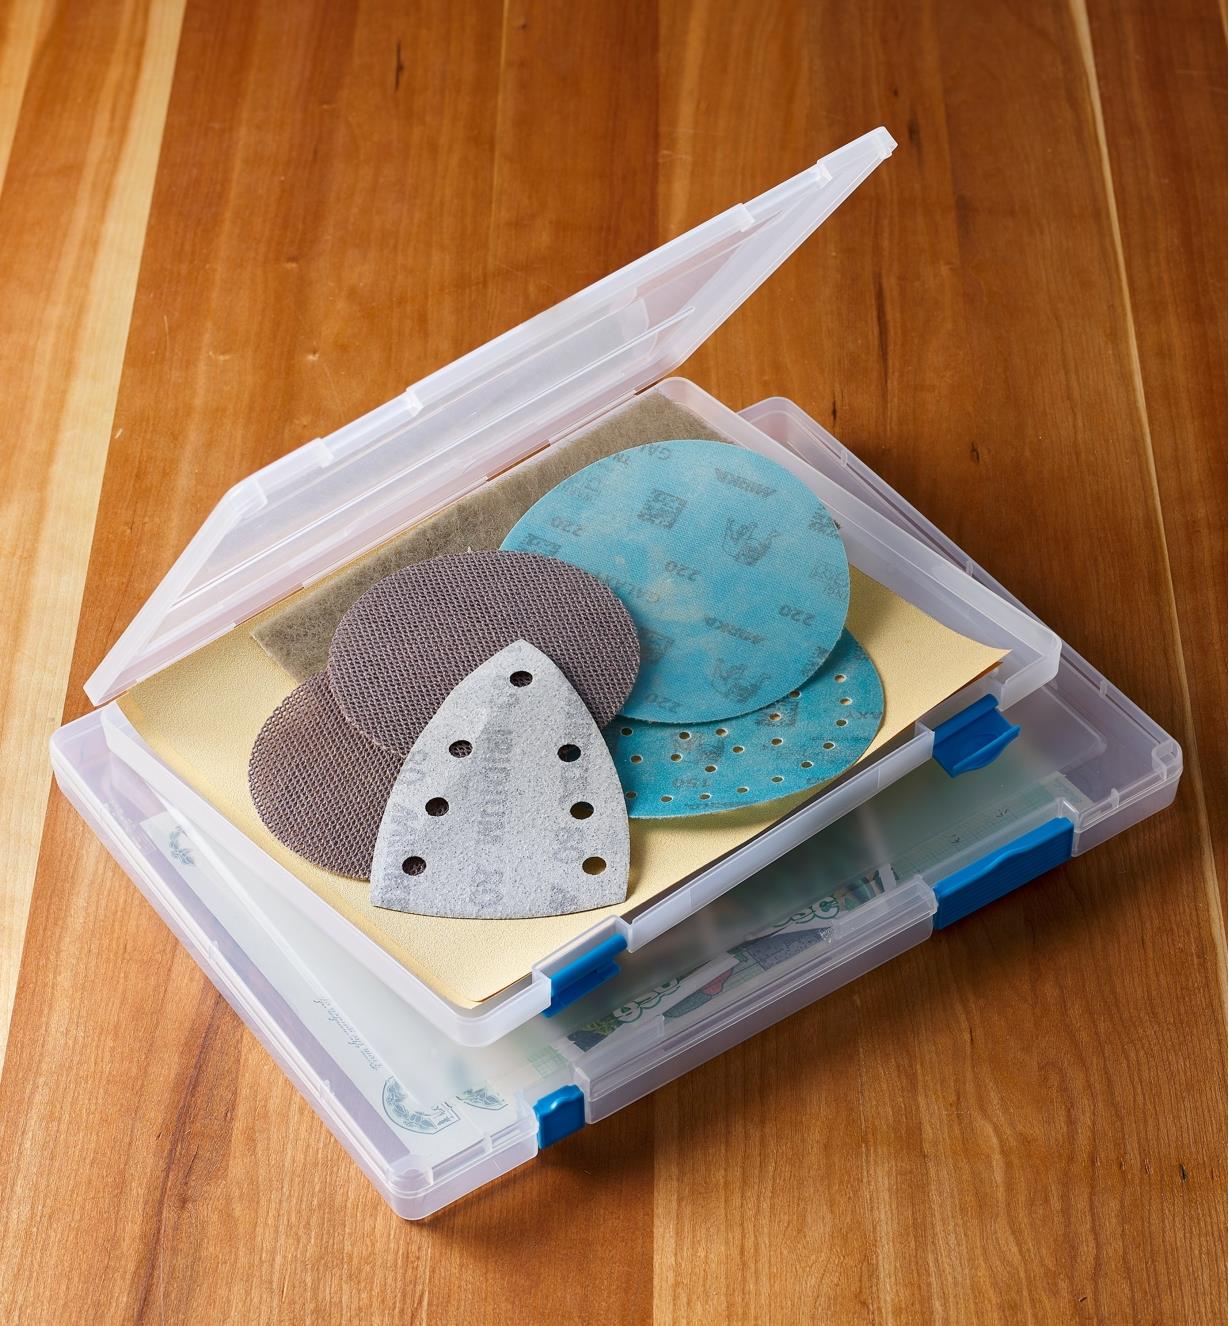 A legal-size case full of sandpaper and other abrasives set on a letter-size case holding seed packs